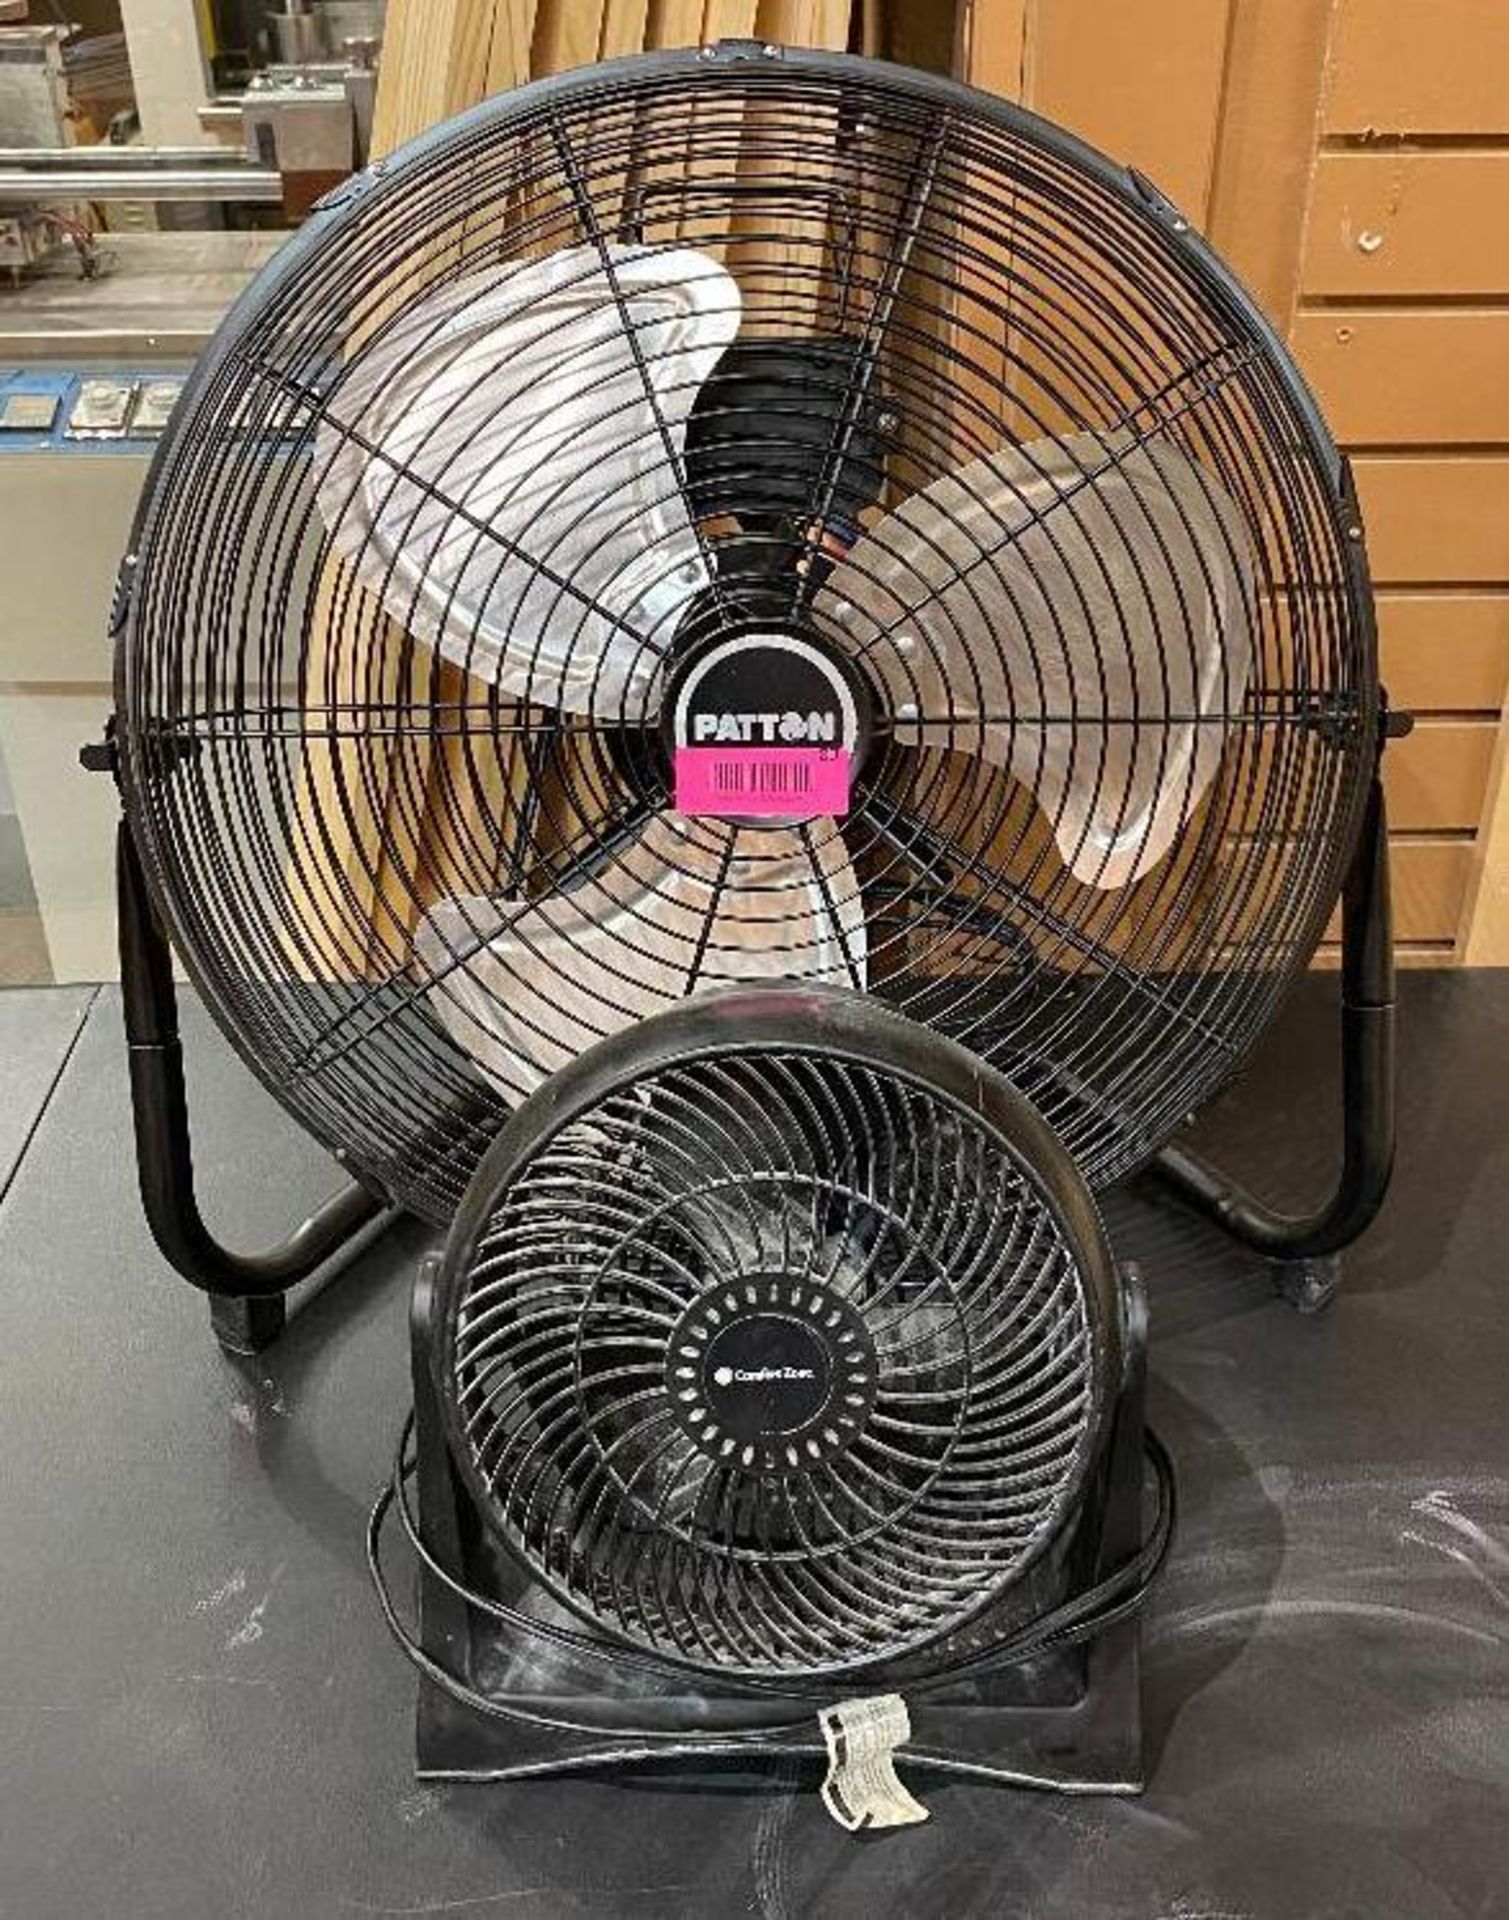 DESCRIPTION ASSORTED FANS AS SHOWN BRAND/MODEL PATTON LOCATION MAIN LOBBY THIS LOT IS ONE MONEY QUAN